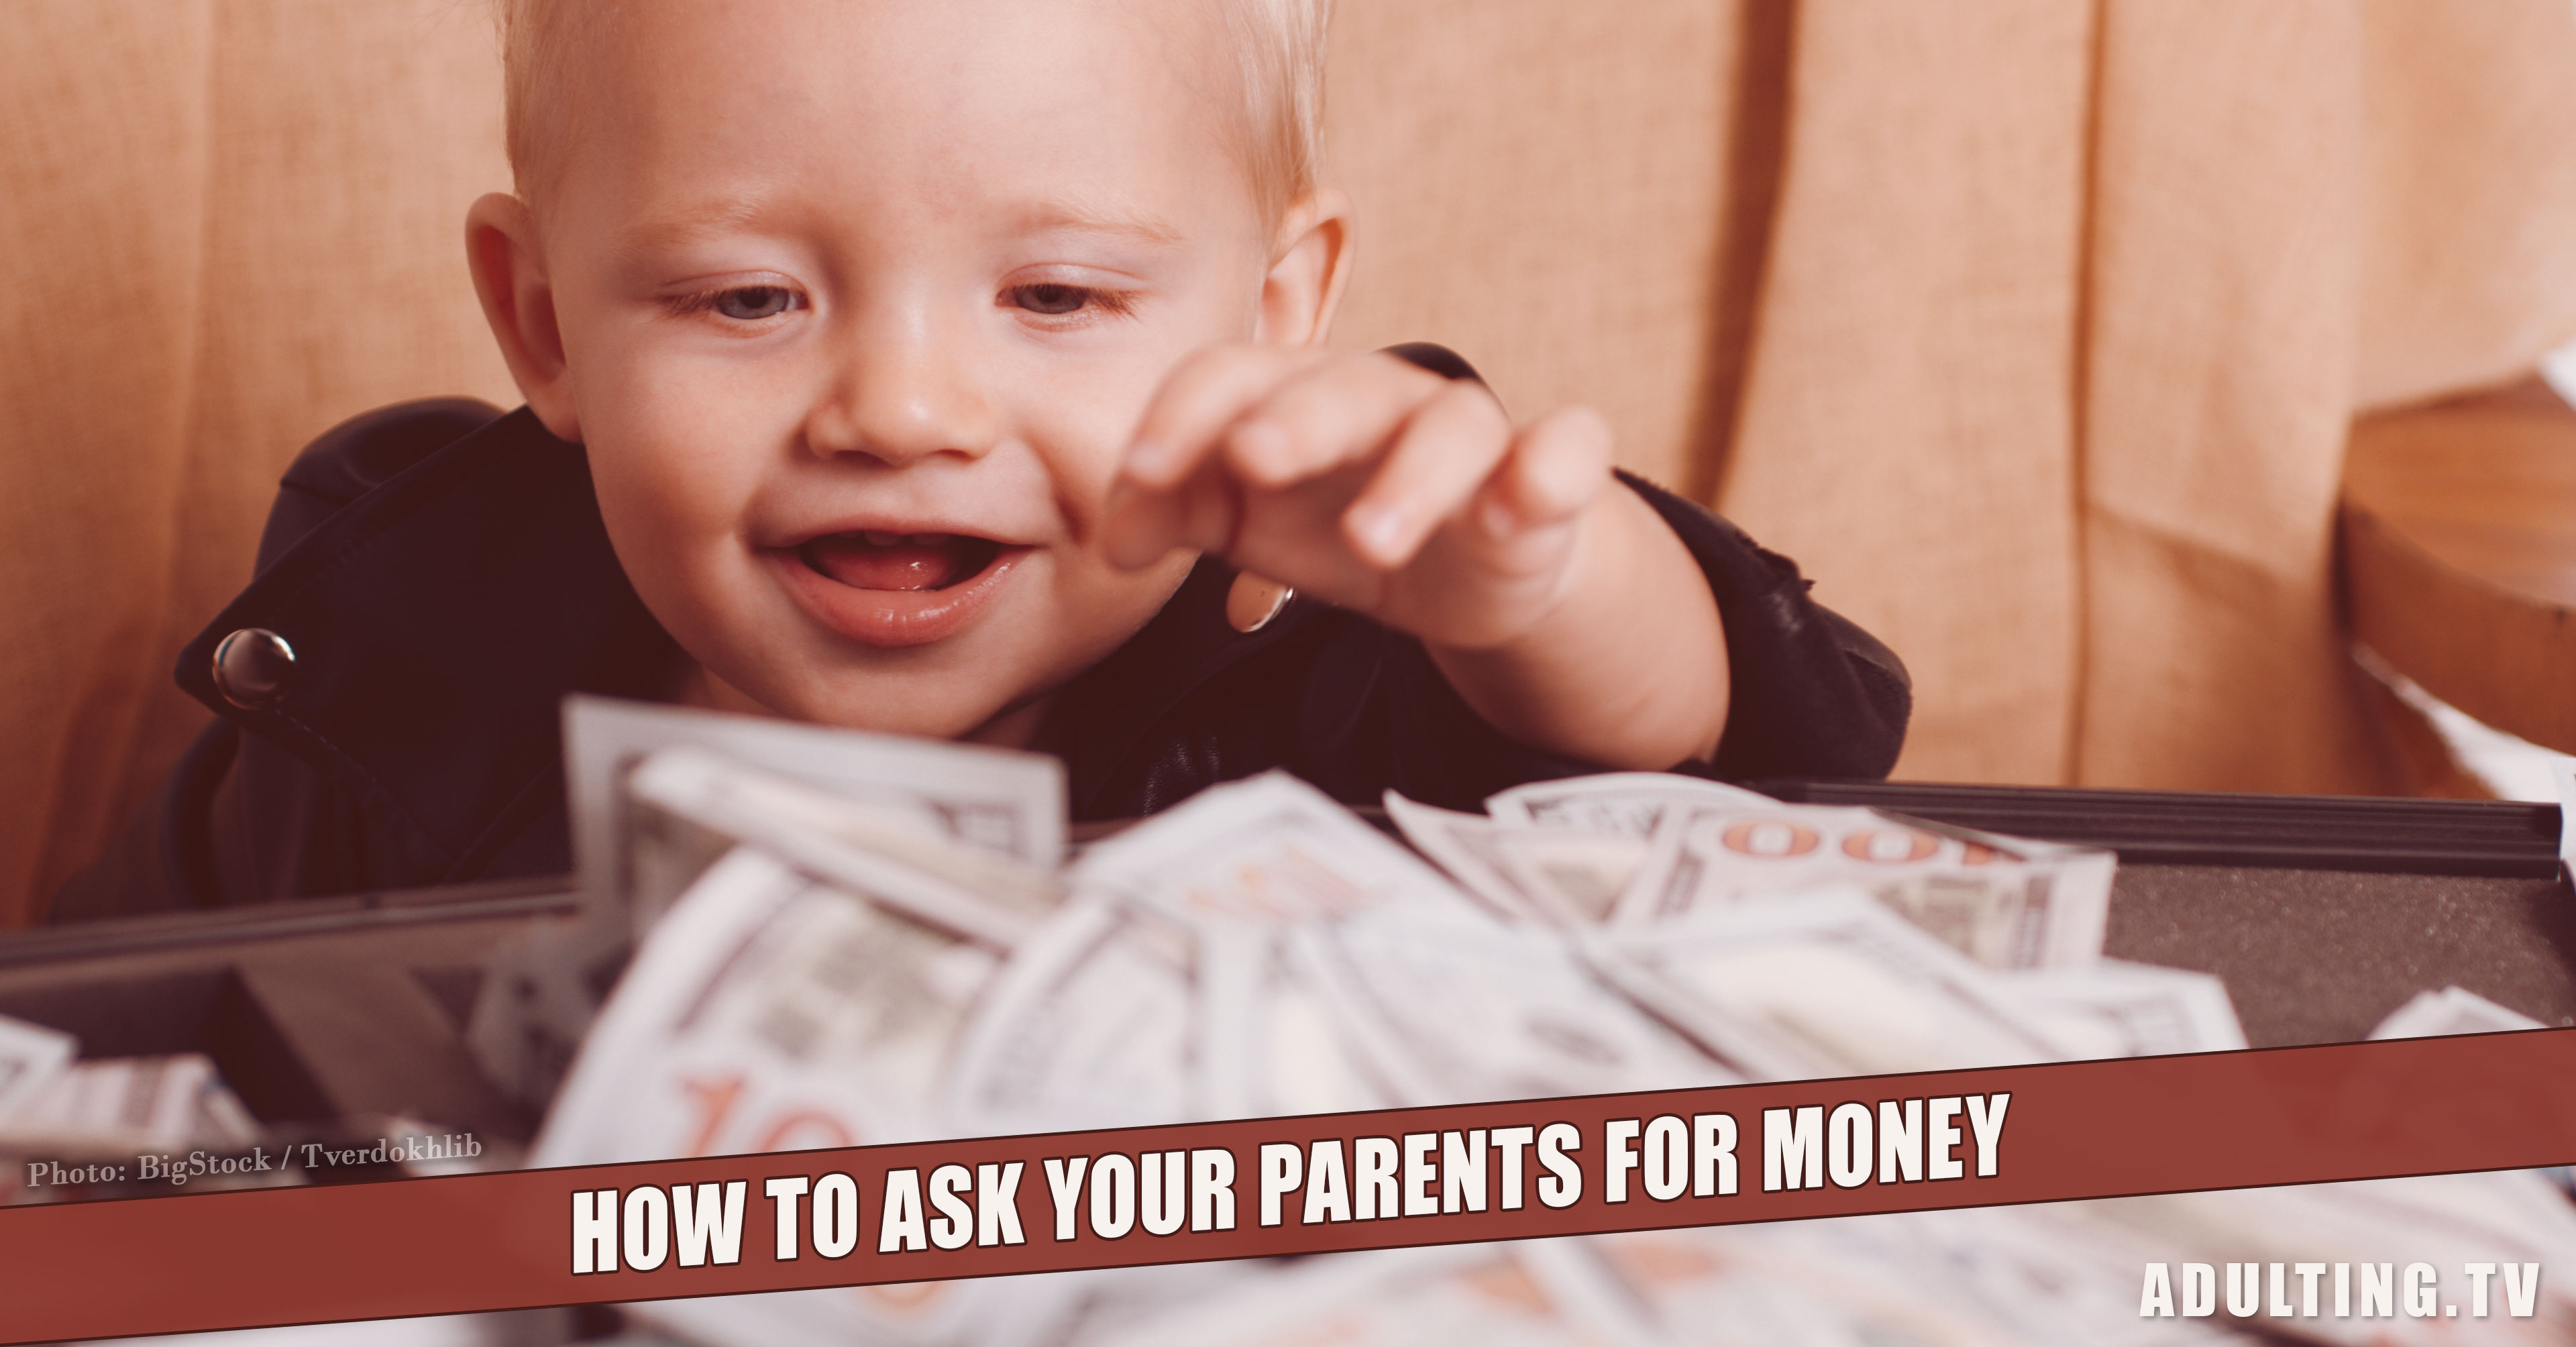 How To Ask Parents For Money? 